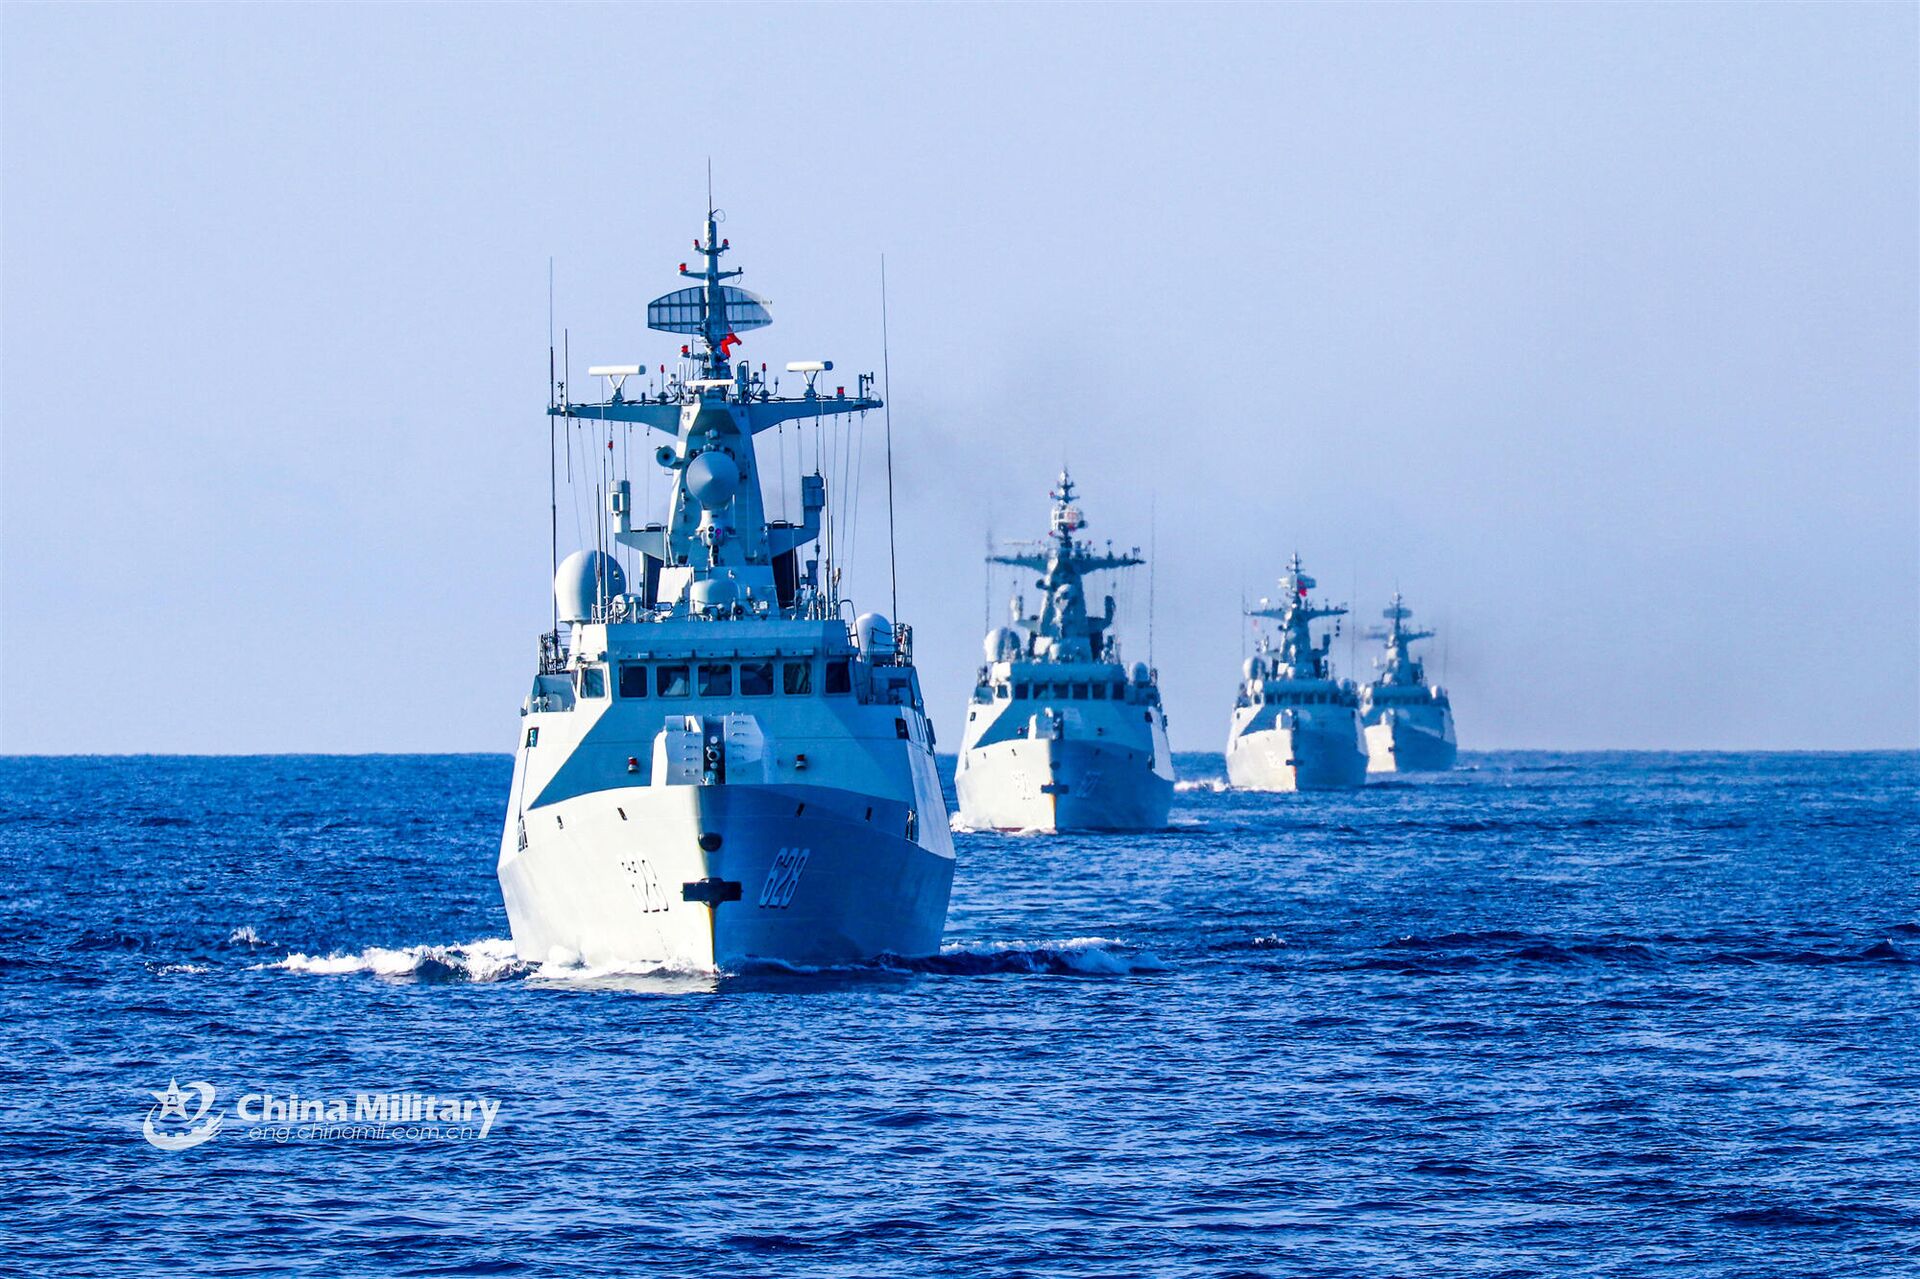 The frigate Enshi (Hull 627), Yongzhou (Hull 628), Bazhong (Hull 625), and Wuzhou (Hull 626) steam in formation during a 9-day maritime training exercise in waters of the South China Sea in late November, 2020. They are attached to a frigate flotilla of the navy under the PLA Southern Theater Command. - Sputnik International, 1920, 23.05.2022